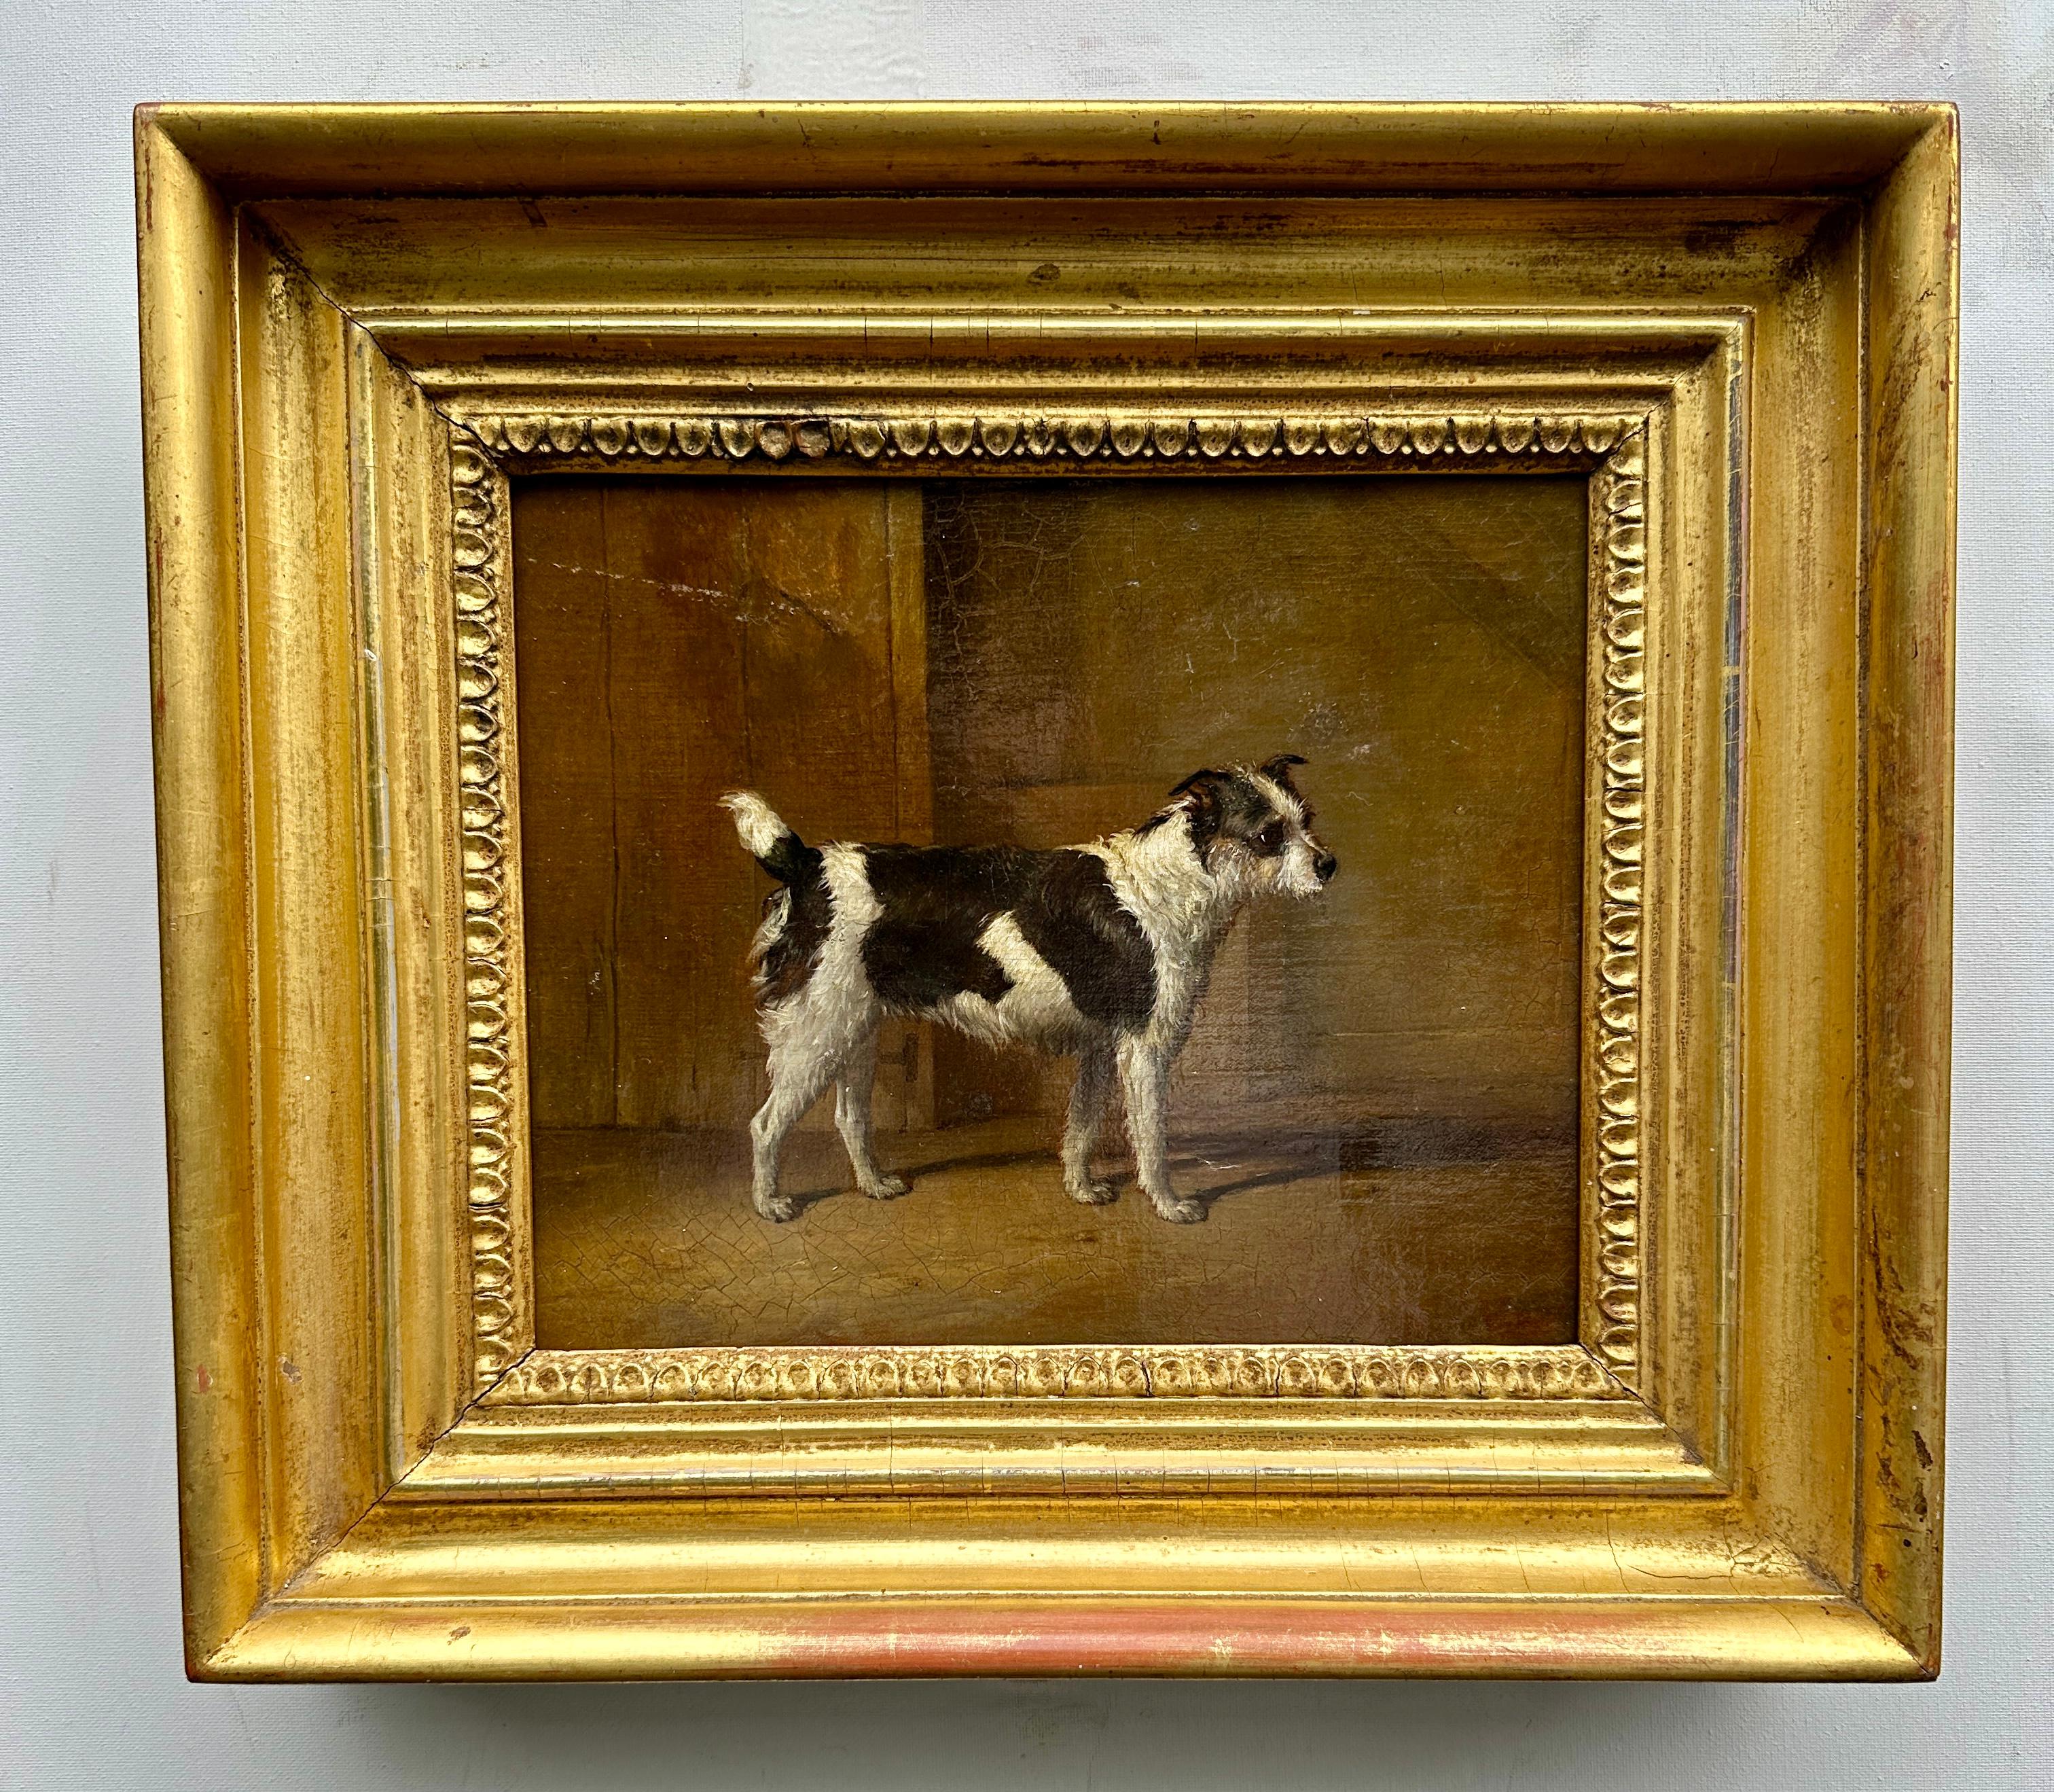 Ben Marshall Animal Painting - 19th century English portrait of a terrier dog in an interior